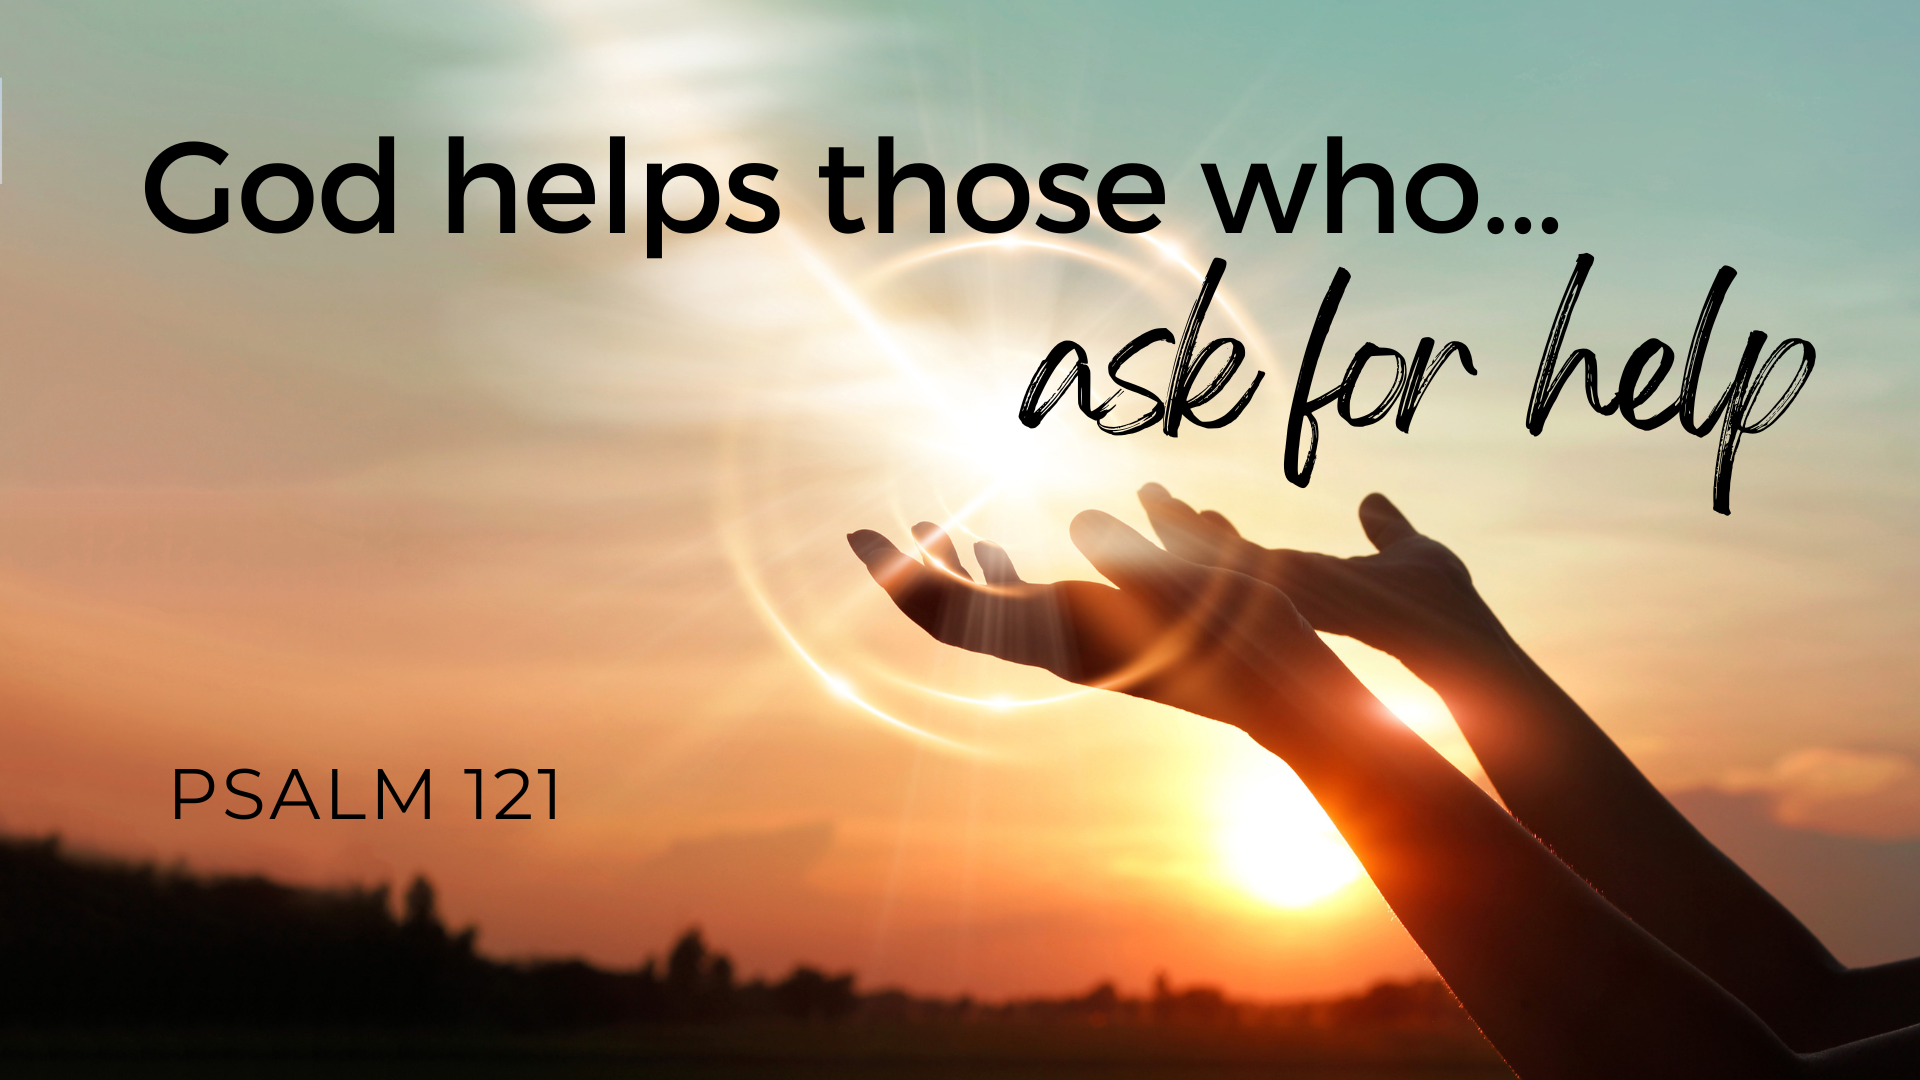 God helps those who... ask for help